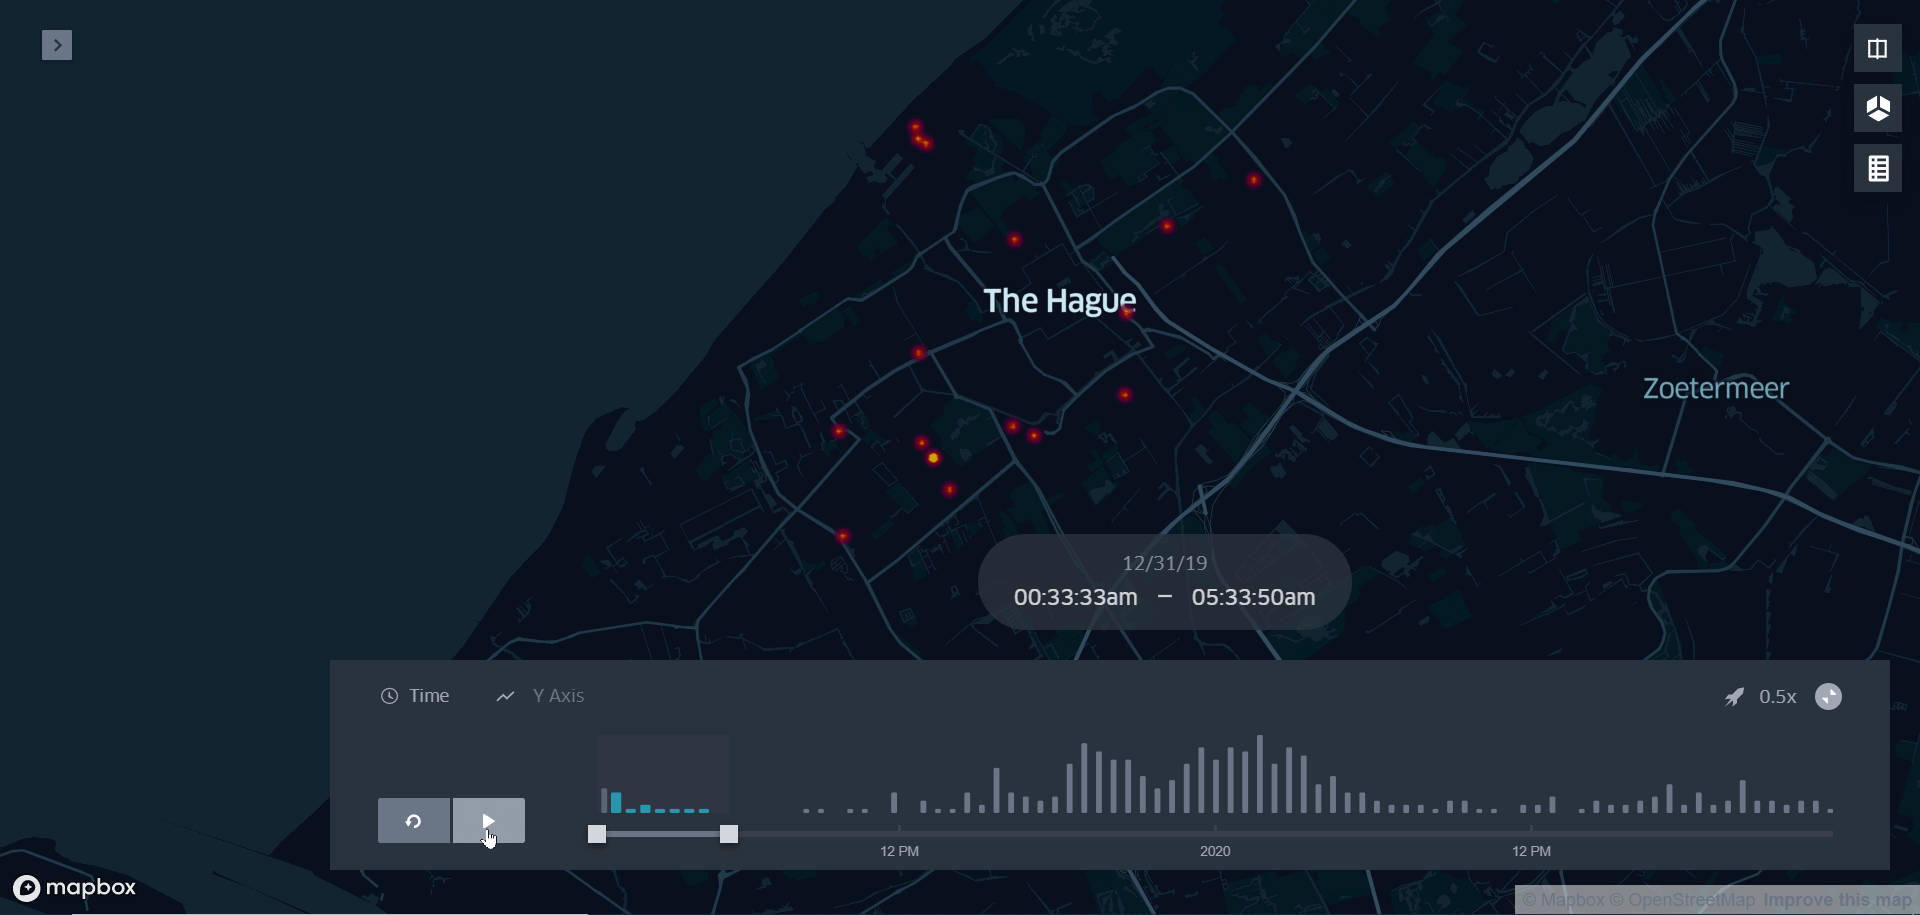 Visualisation of firefighter calls in The Hague leading up to and directly after the new year&rsquo;s eve.